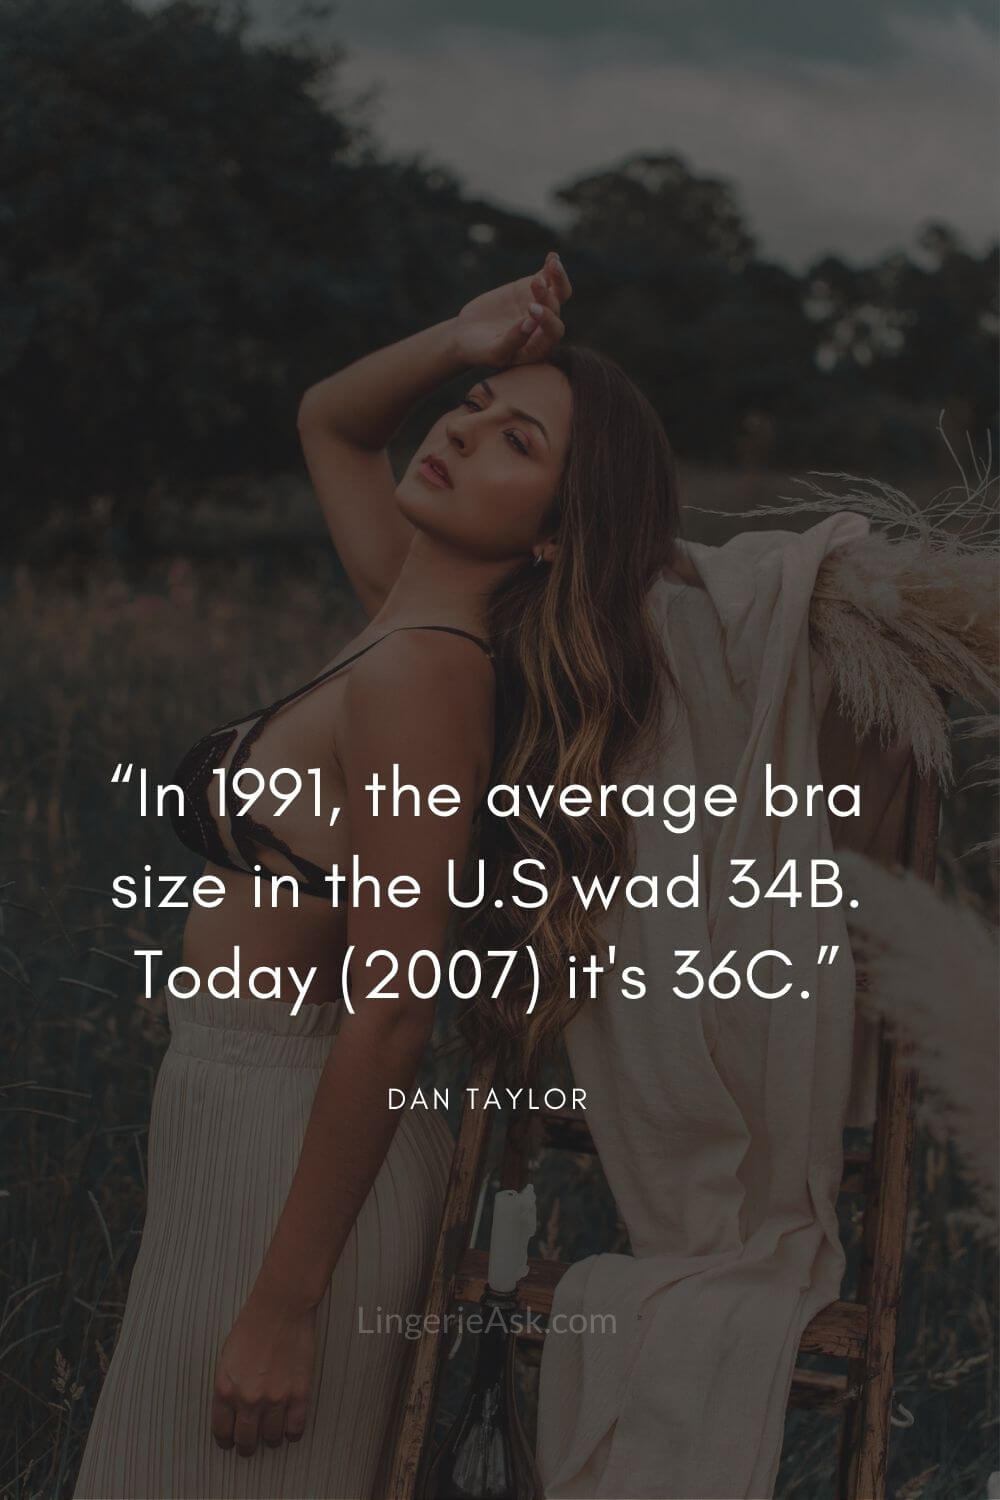 “In 1991, the average bra size in the U.S wad 34B. Today (2007) it's 36C.”